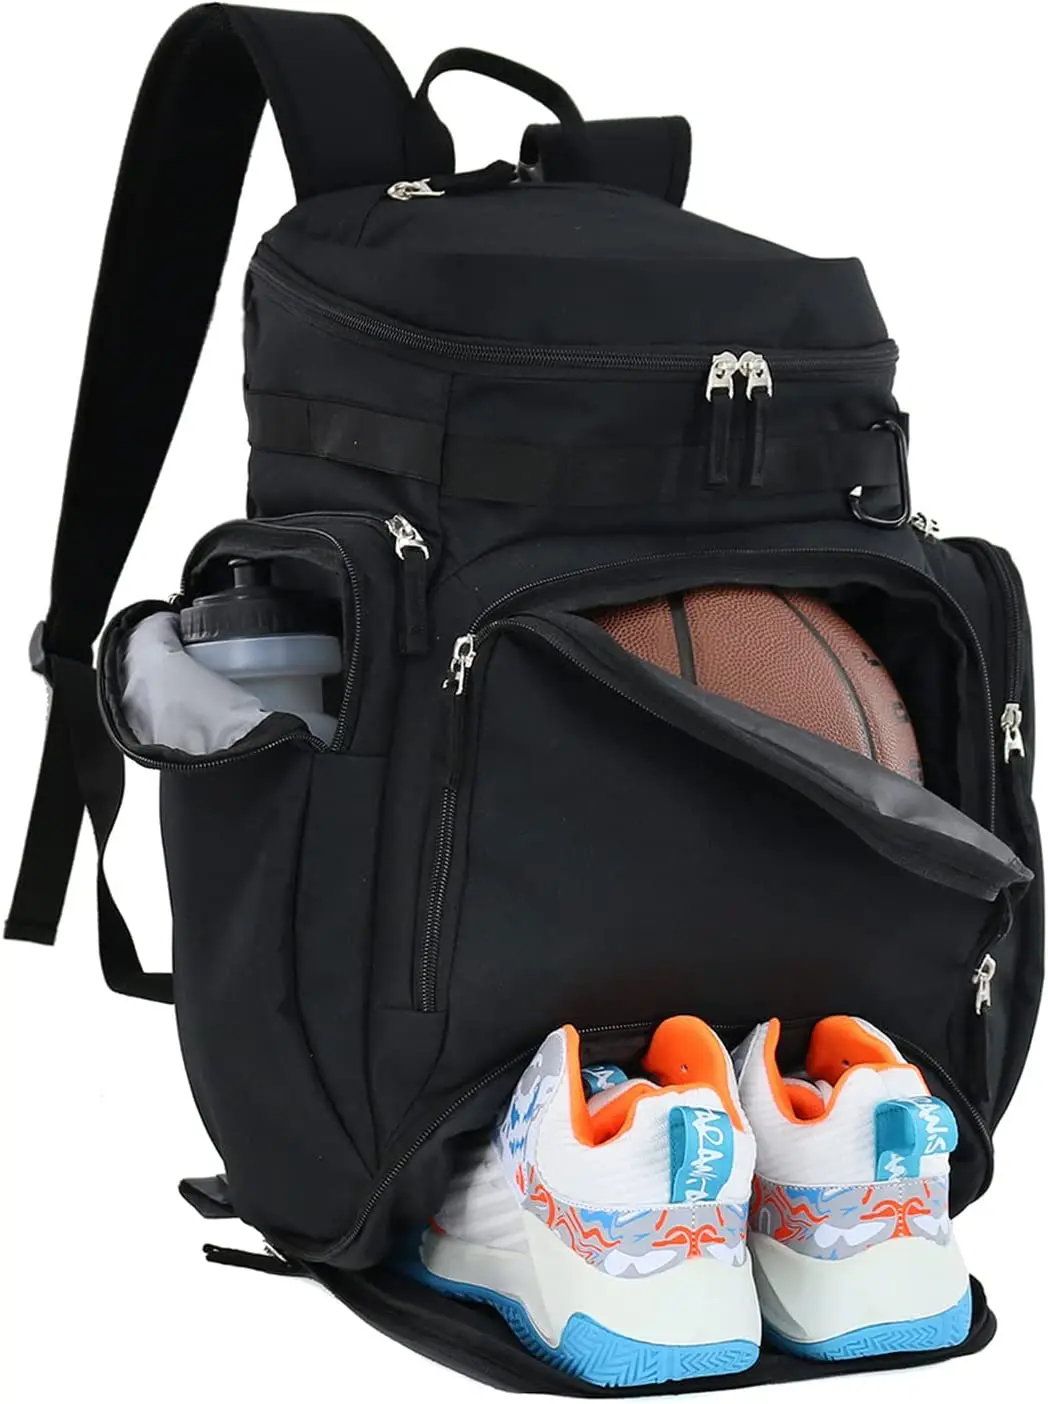 

Backpack Large Backpack Basketball Ball Compartment, Backpack, Shoe Soccer And Bag Sport With Baseball, Volleyball Softball, Bag